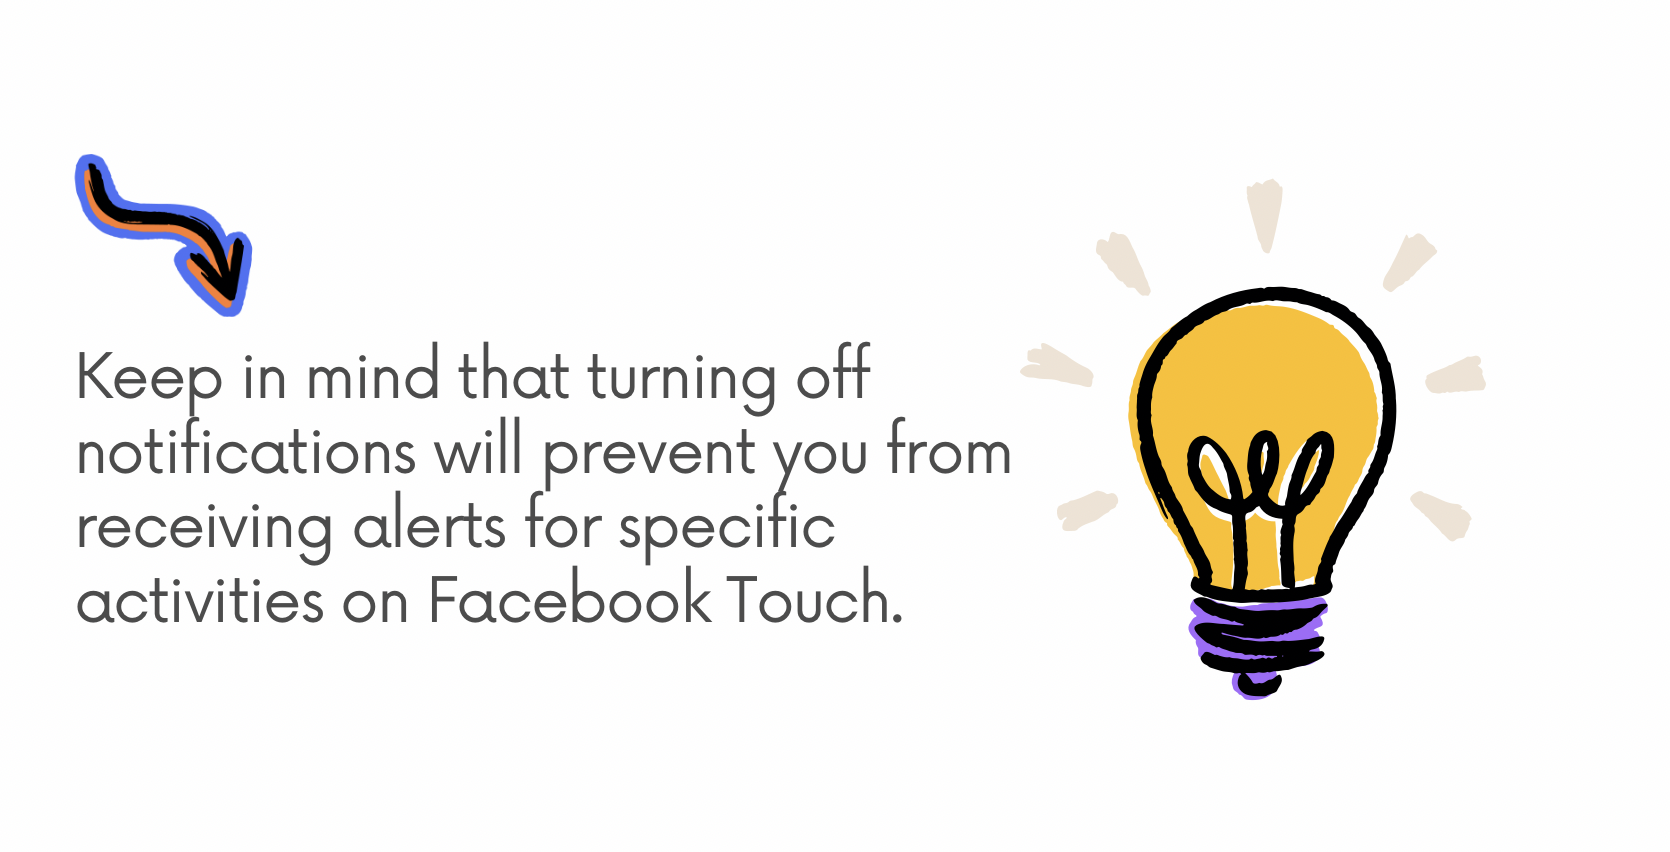 tutorial: How Can I Turn off Facebook Touch Notifications?